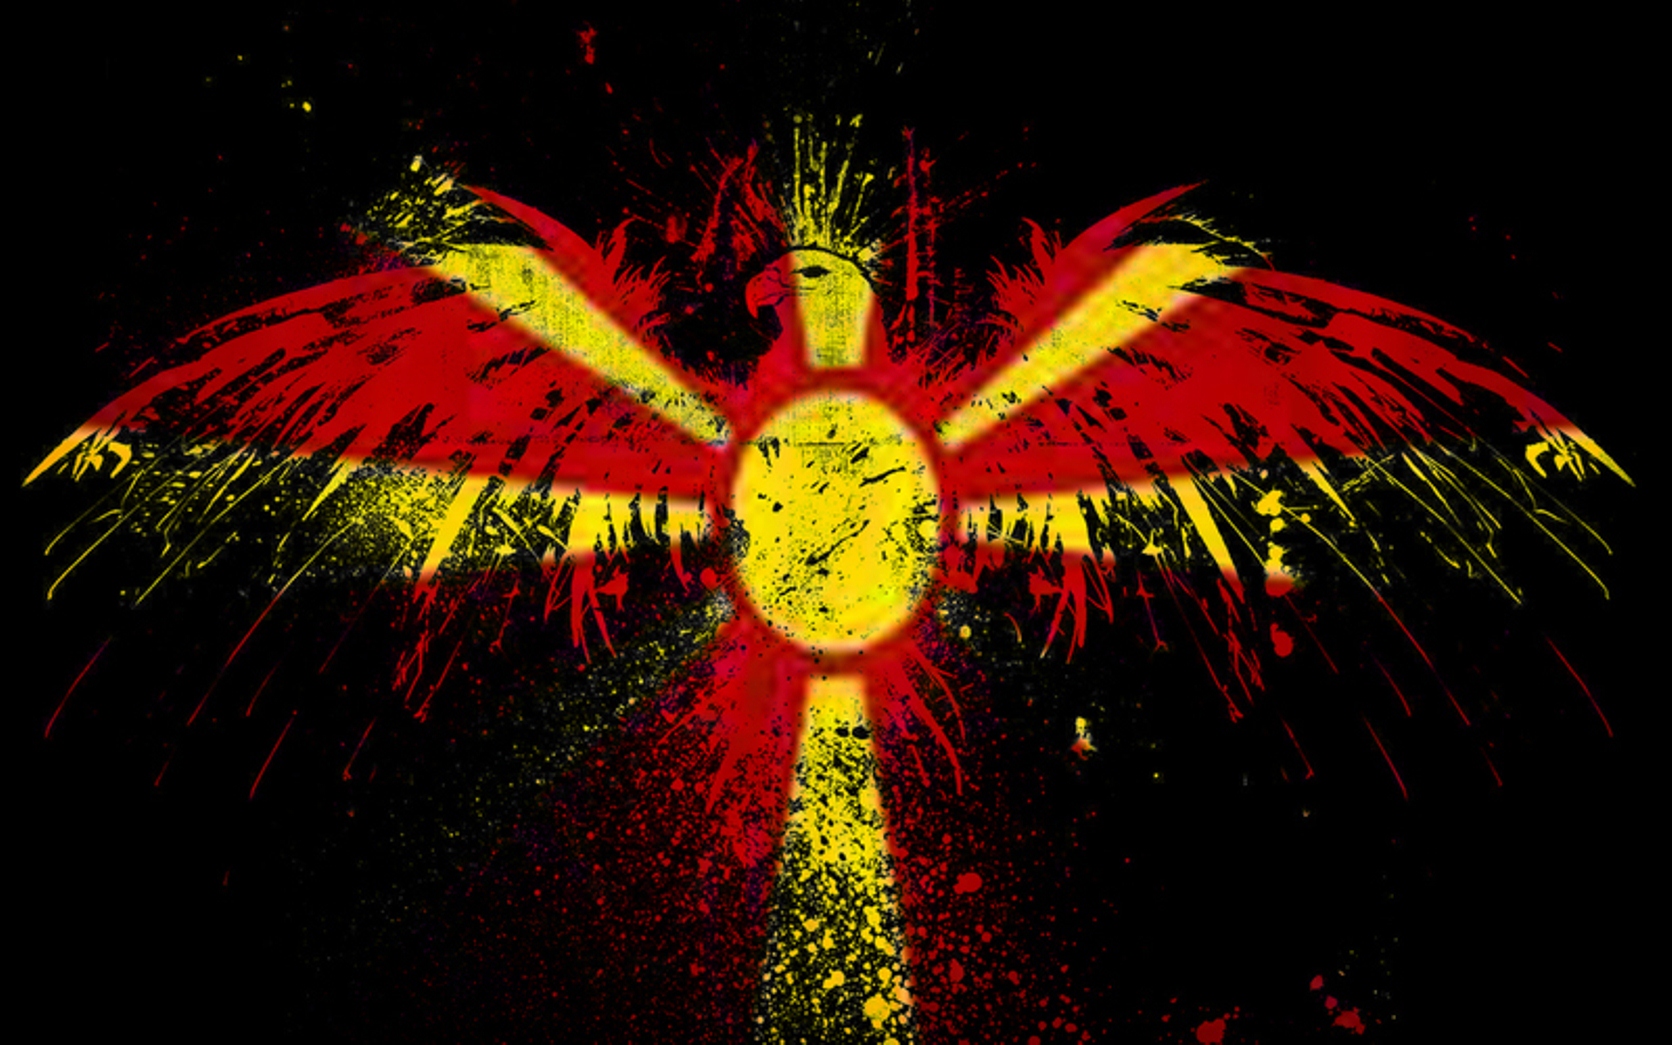 Spain Flag Image And Wallpaper For Mac Pc Bsnscb